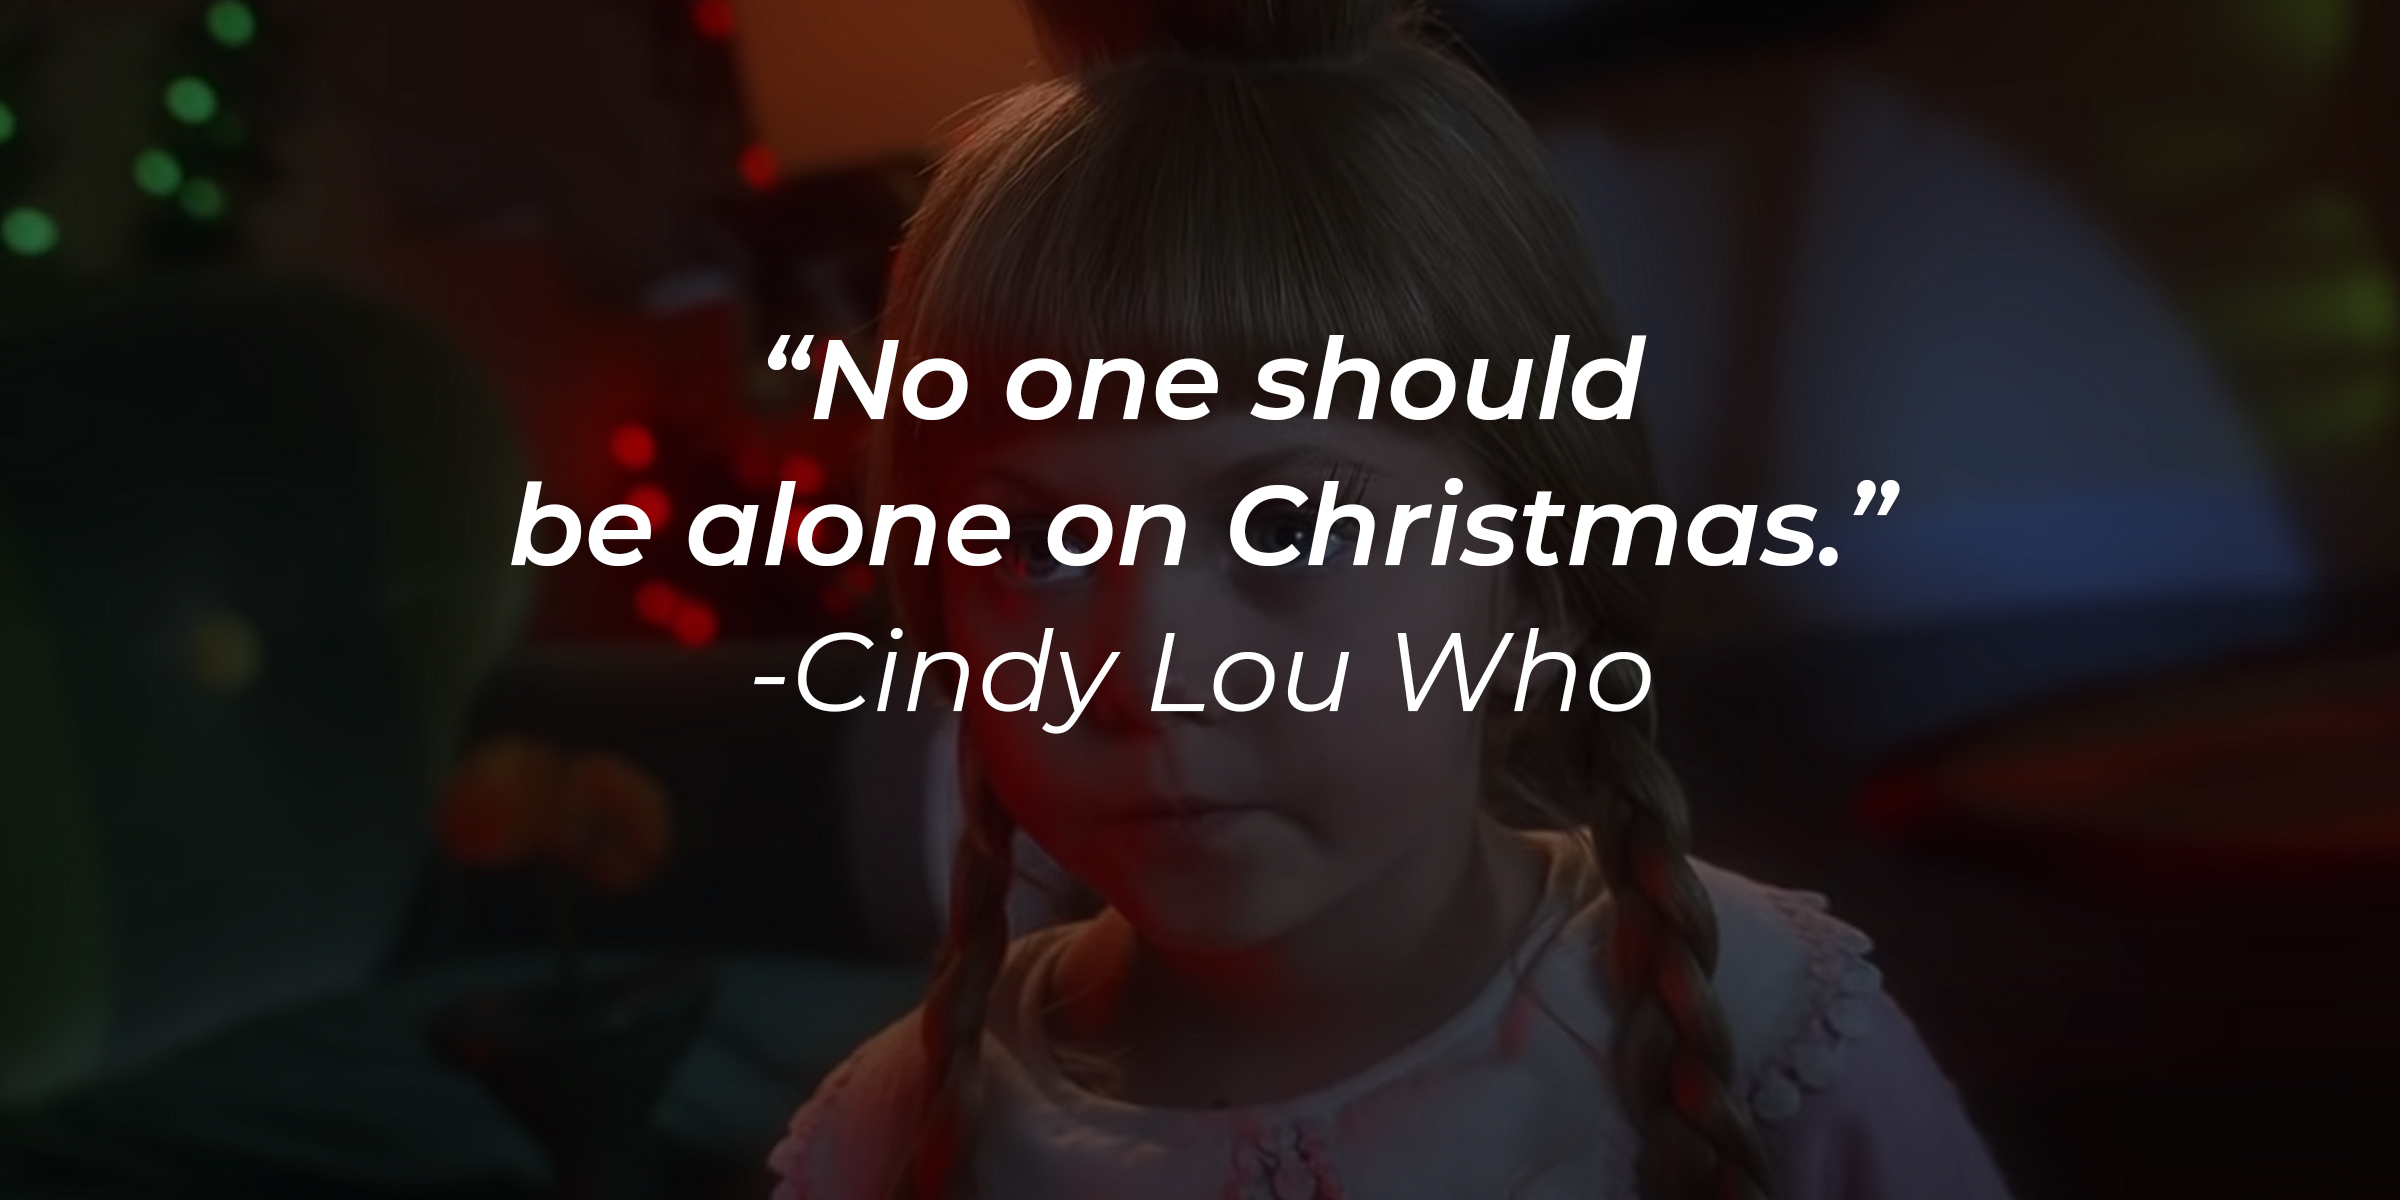 Cindy Lou Who, with her quote: "No one should be alone on Christmas." | Source: Youtube.com/UniversalPictures